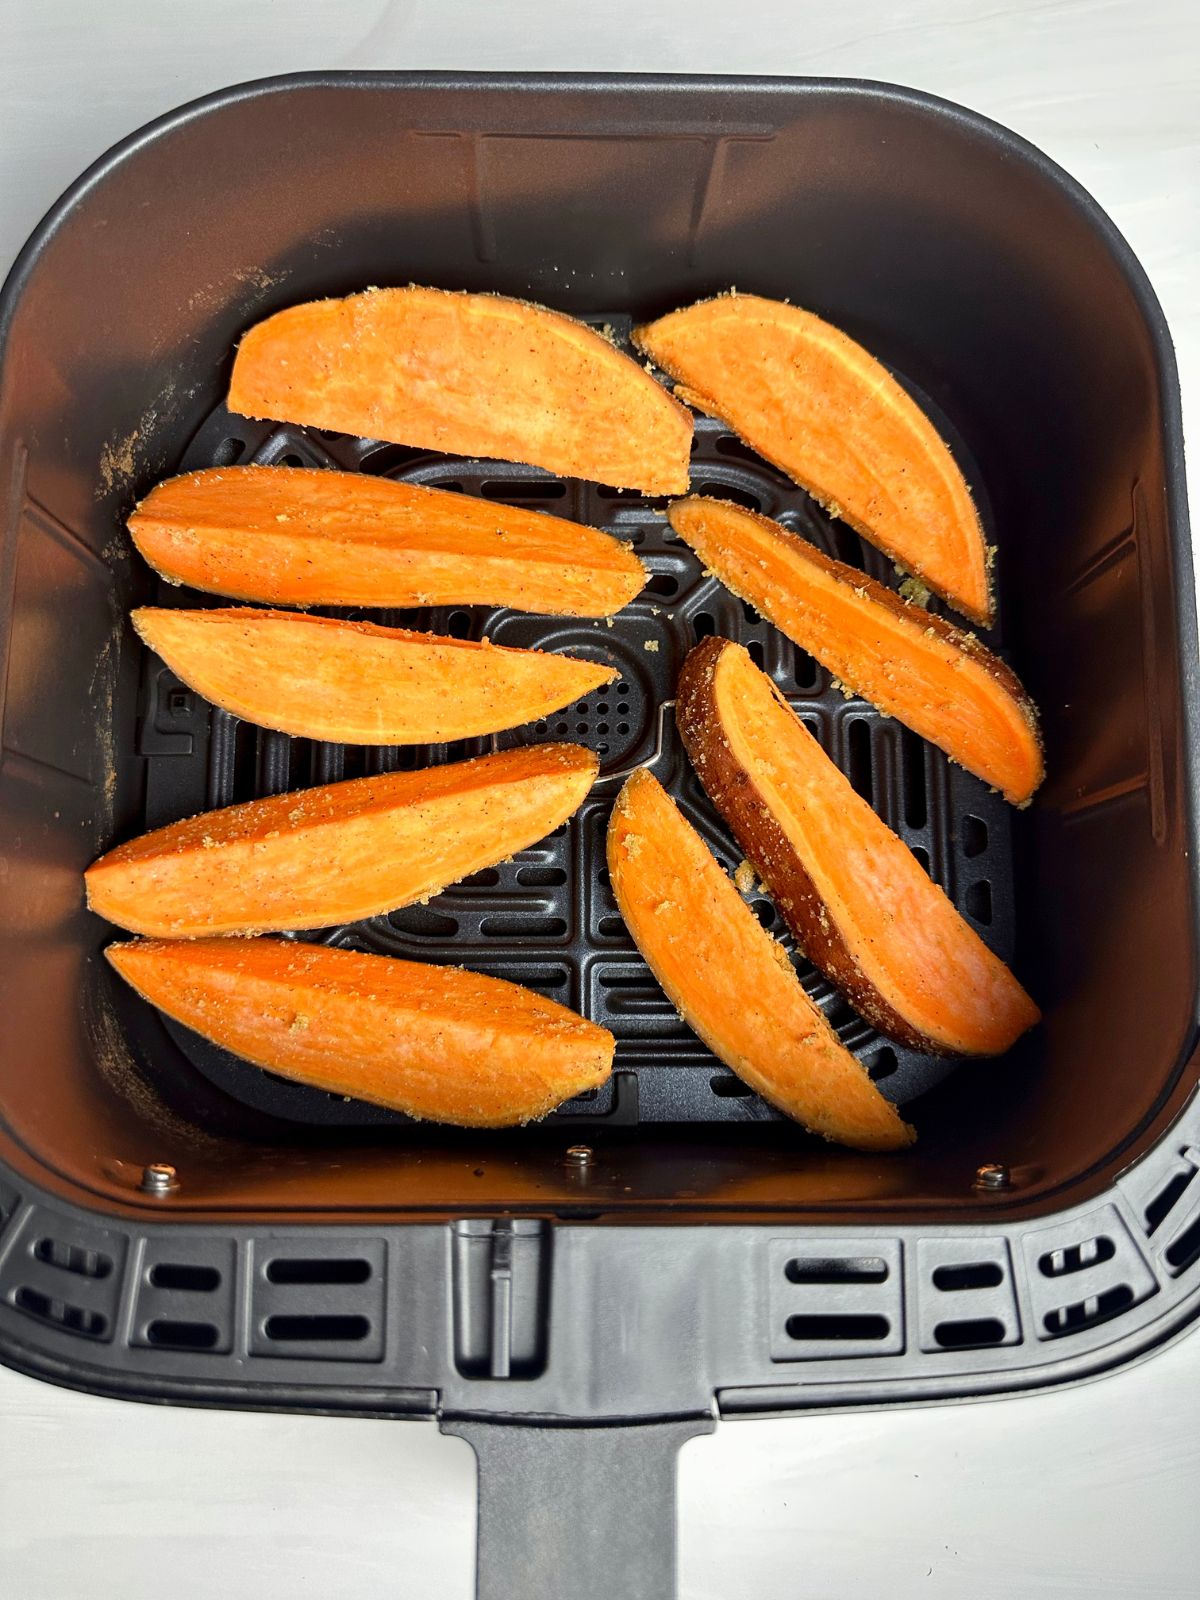 Sweet potato wedges in the air fryer basket.